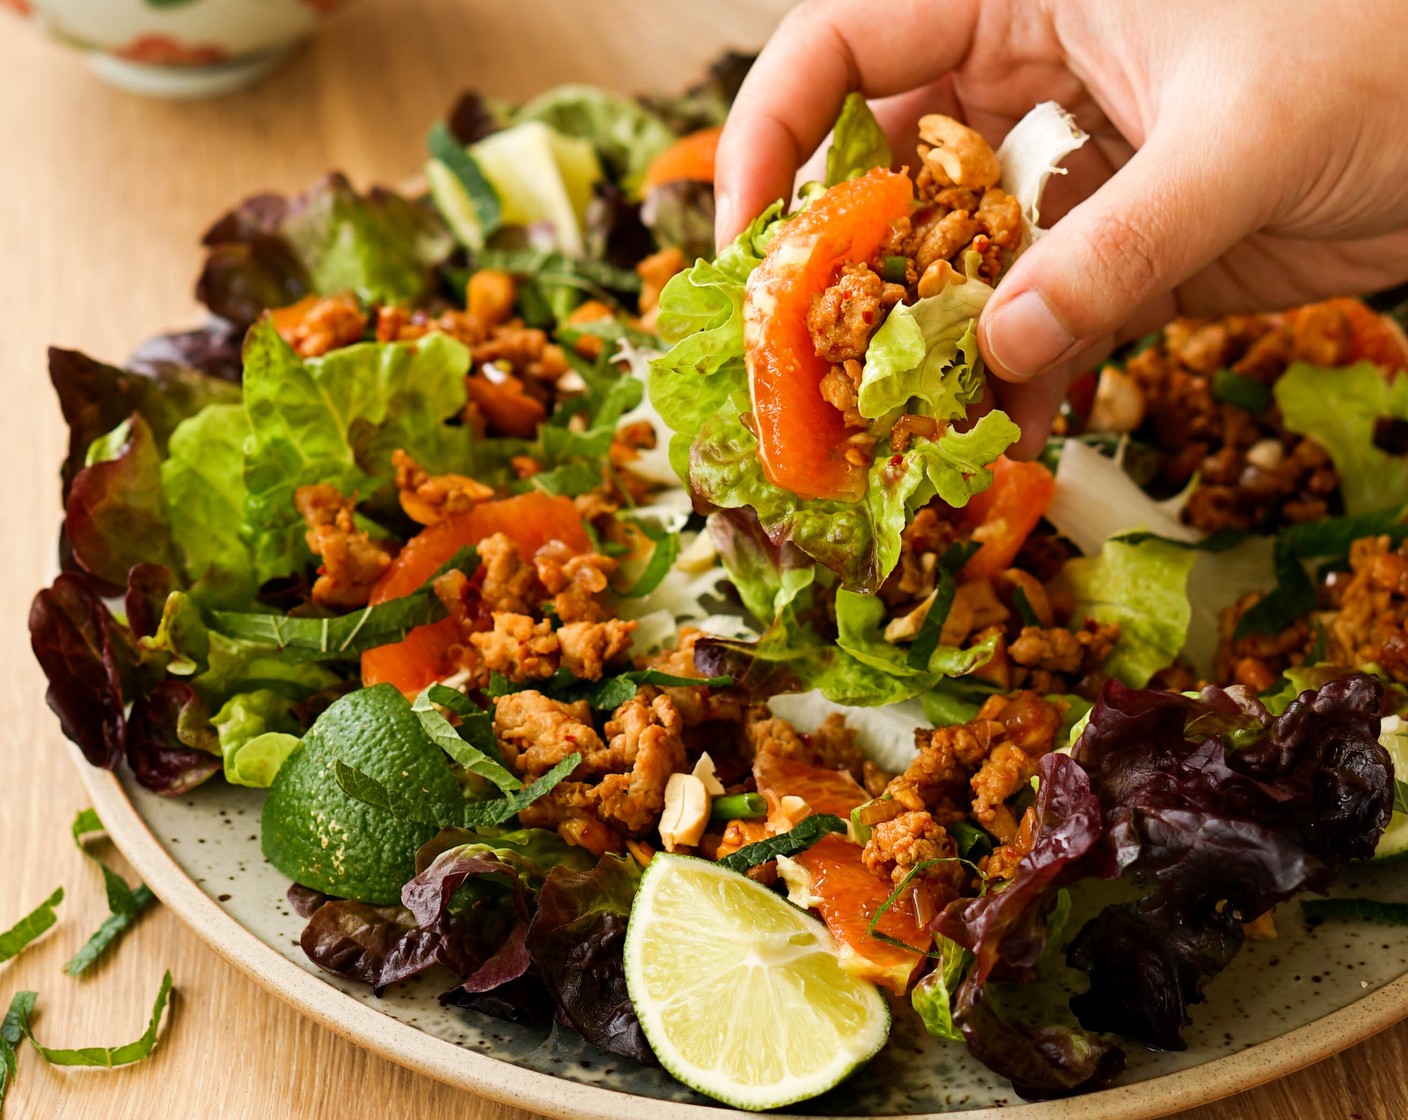 step 4 Arrange a bunch of Lettuce Leaves (as needed) on a serving platter. Fill each lettuce leaf with a heaping spoonful of larb and a small wedge of the Orange (1). Garnish with Fresh Mint (1 handful) and enjoy with extra limes!